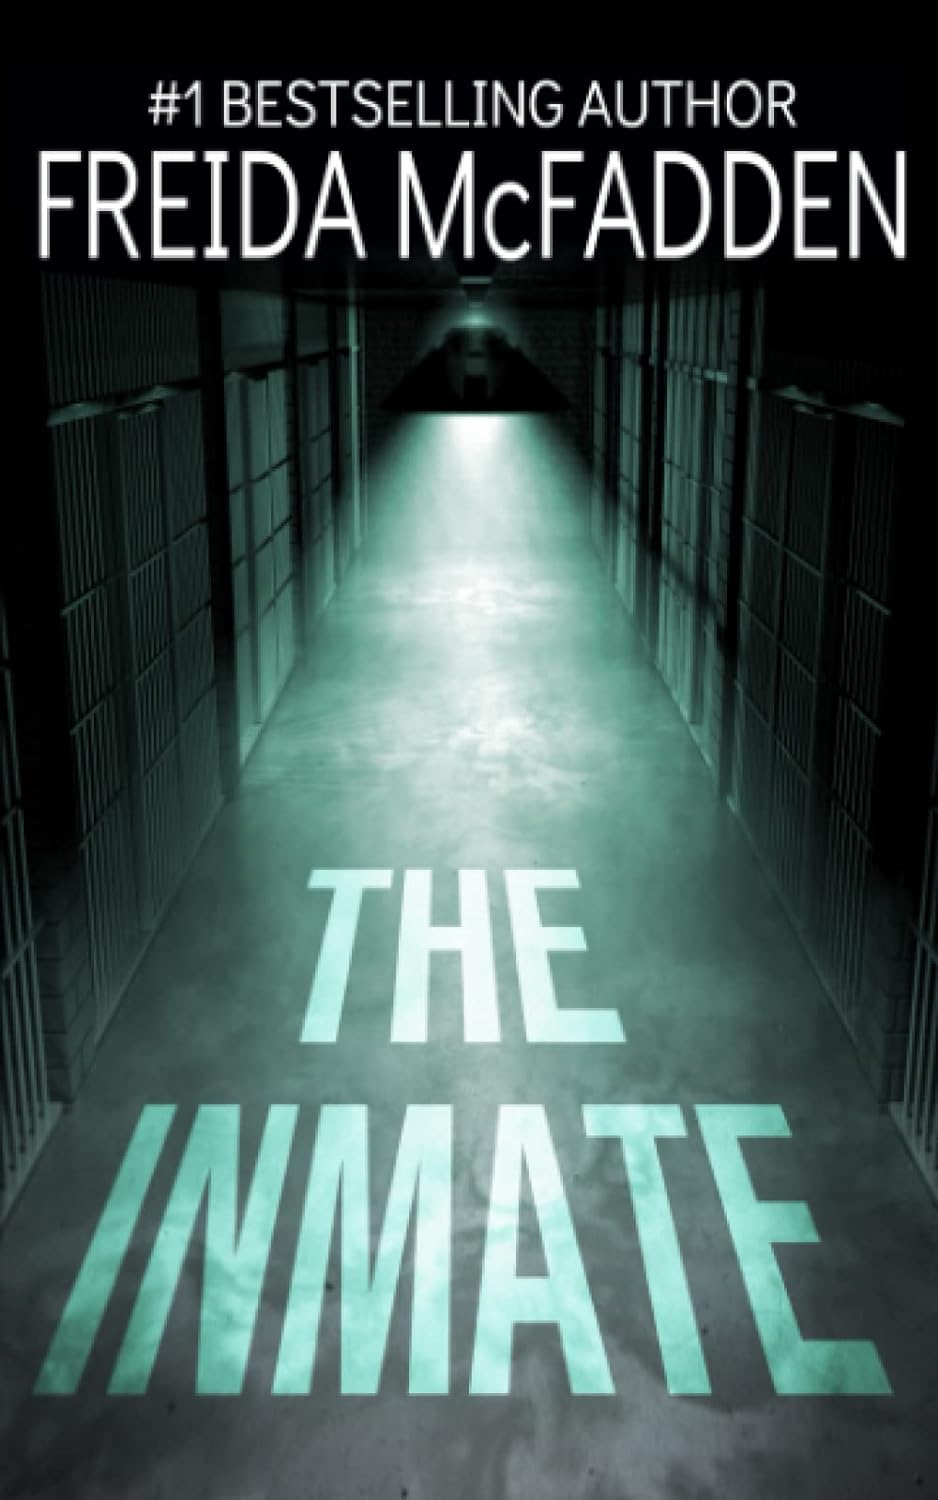 Cover of The Inmate by Freida McFadden. Black and green in color